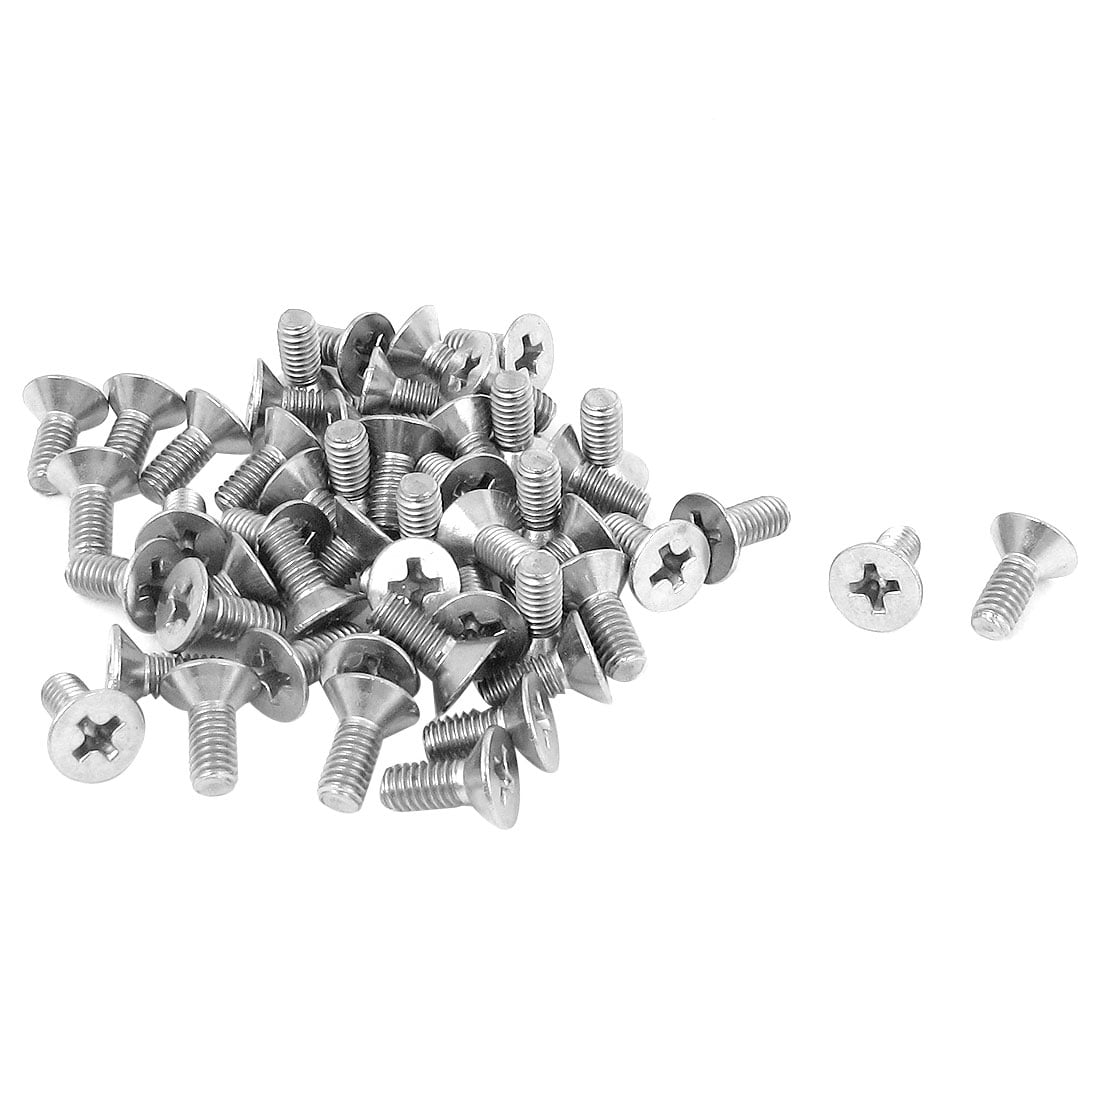 countersunk screws Solid brass screw cup cups pack of 100 for no.7 & 8 3.5/4mm 